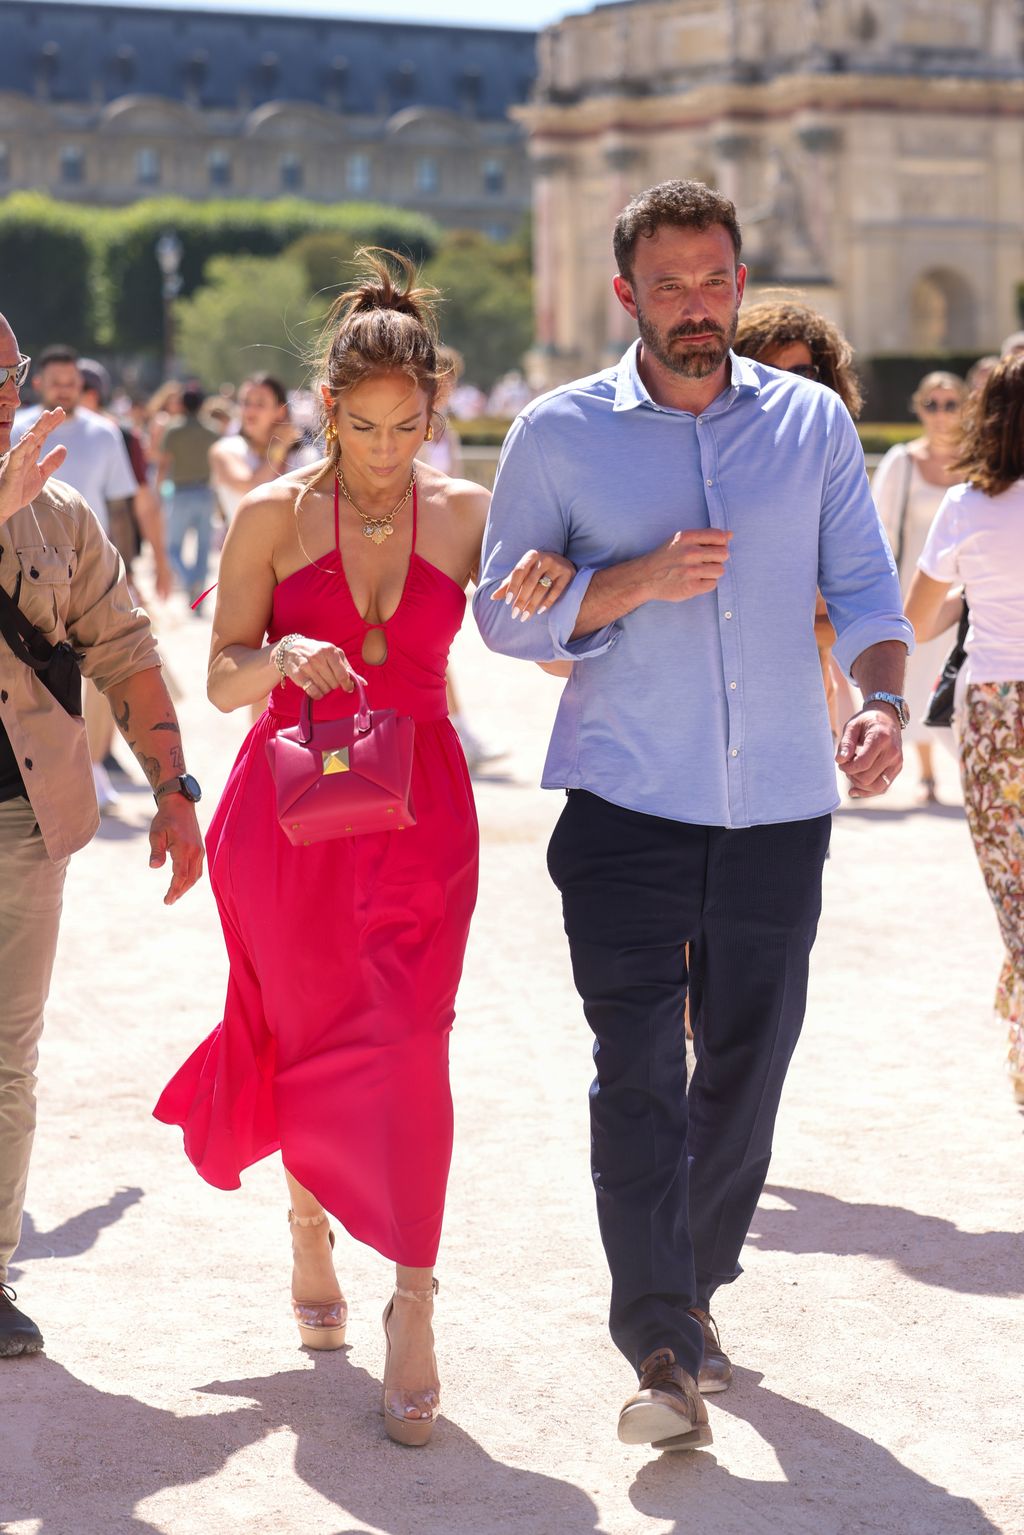 PARIS, FRANCE - JULY 24: Jennifer Lopez and Ben Affleck are seen strolling near the Louvre Museum on July 24, 2022 in Paris, France. (Photo by Pierre Suu/GC Images)